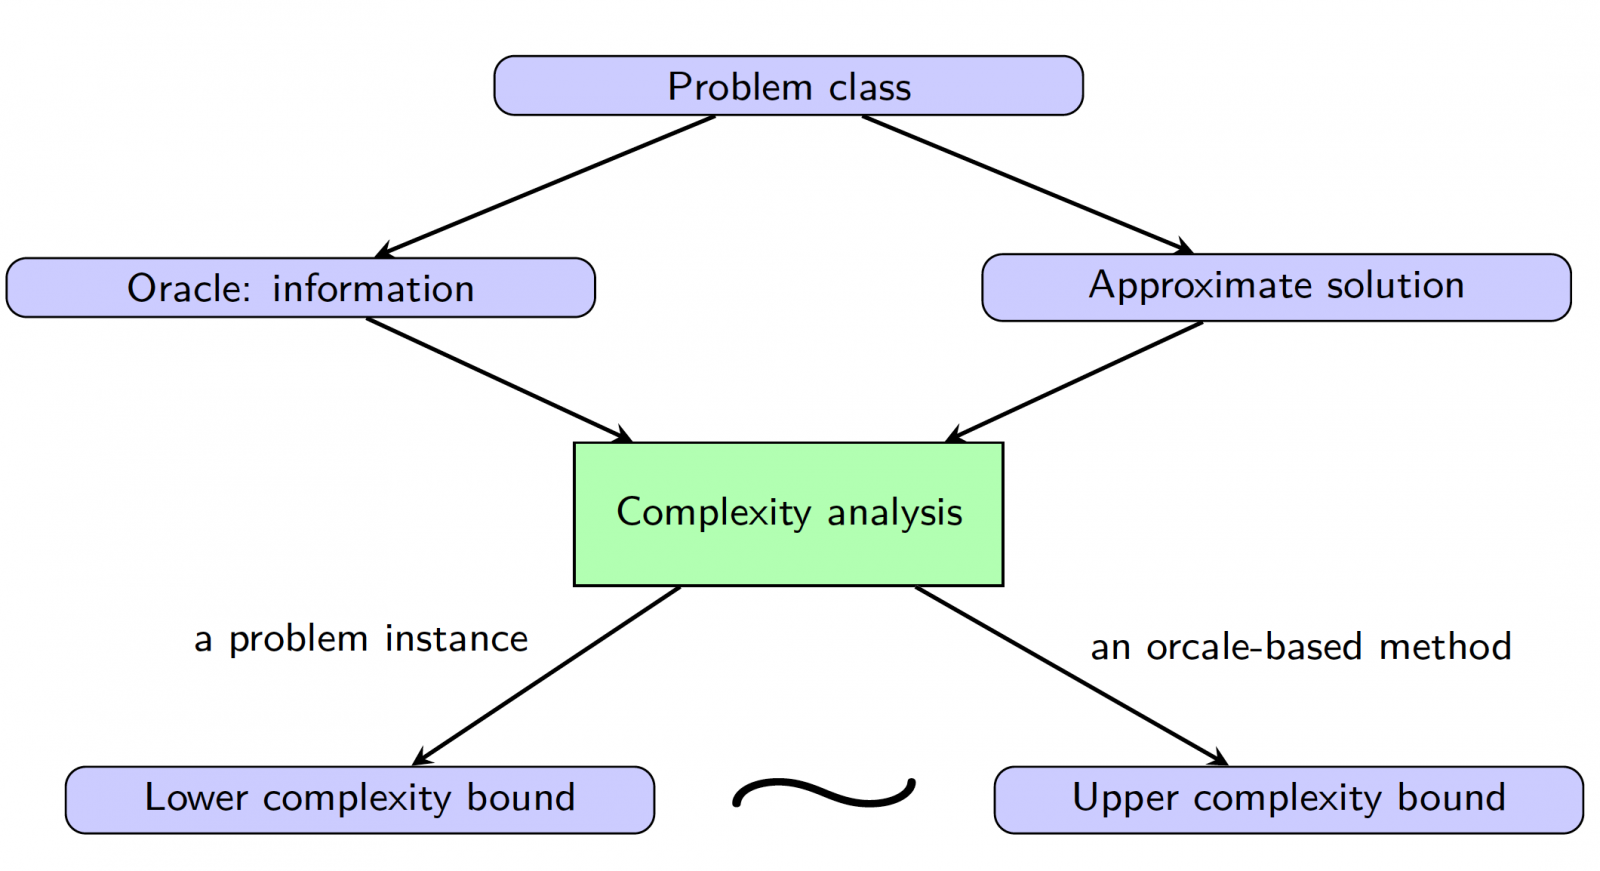 Complexity analysis and optimal methods